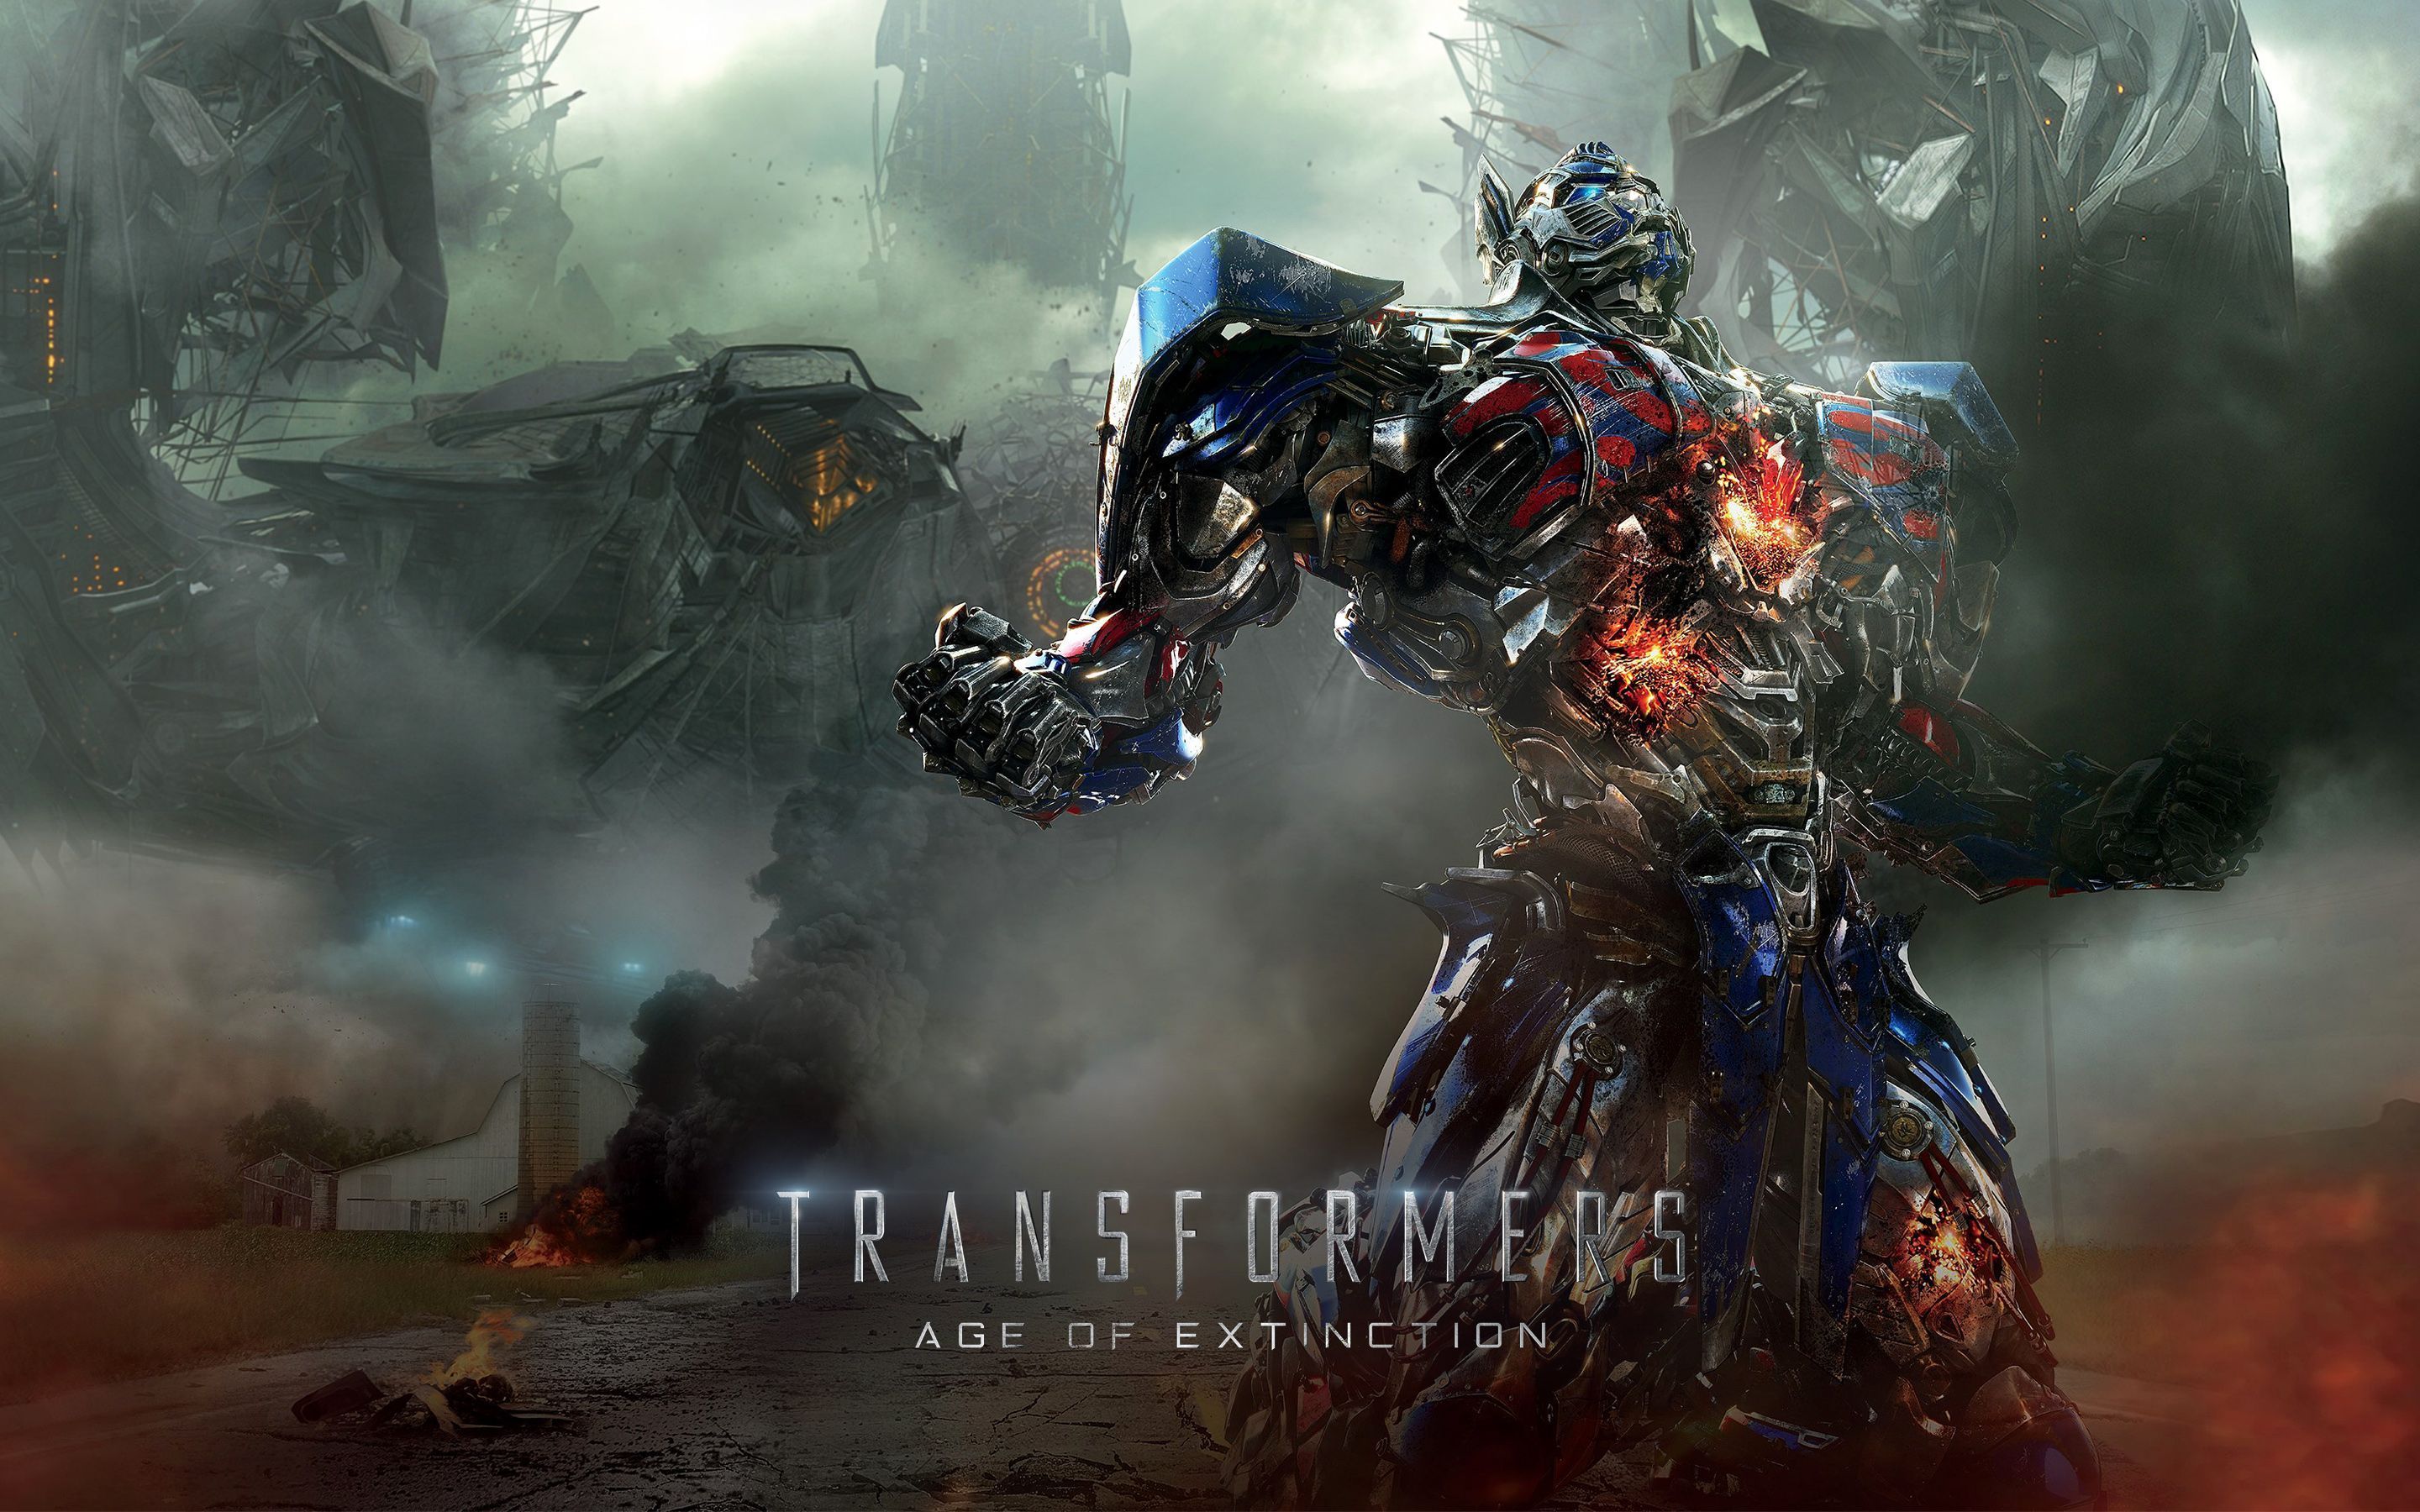 Transformers 4 Age of Extinction 2014 Wallpapers | HD Wallpapers